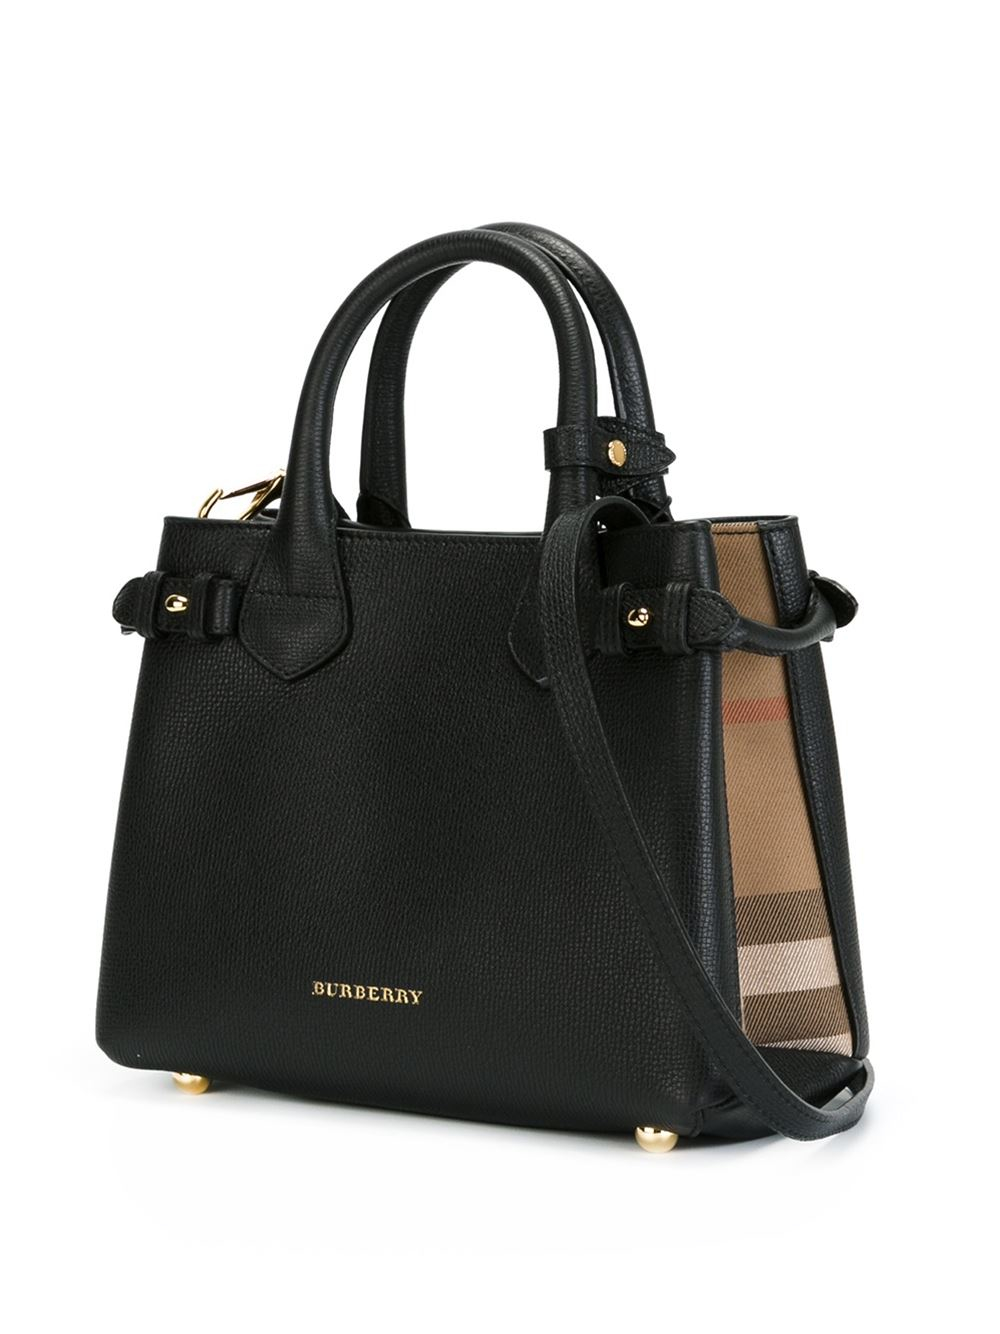 Burberry Leather Small 'banner' Tote in Black - Lyst